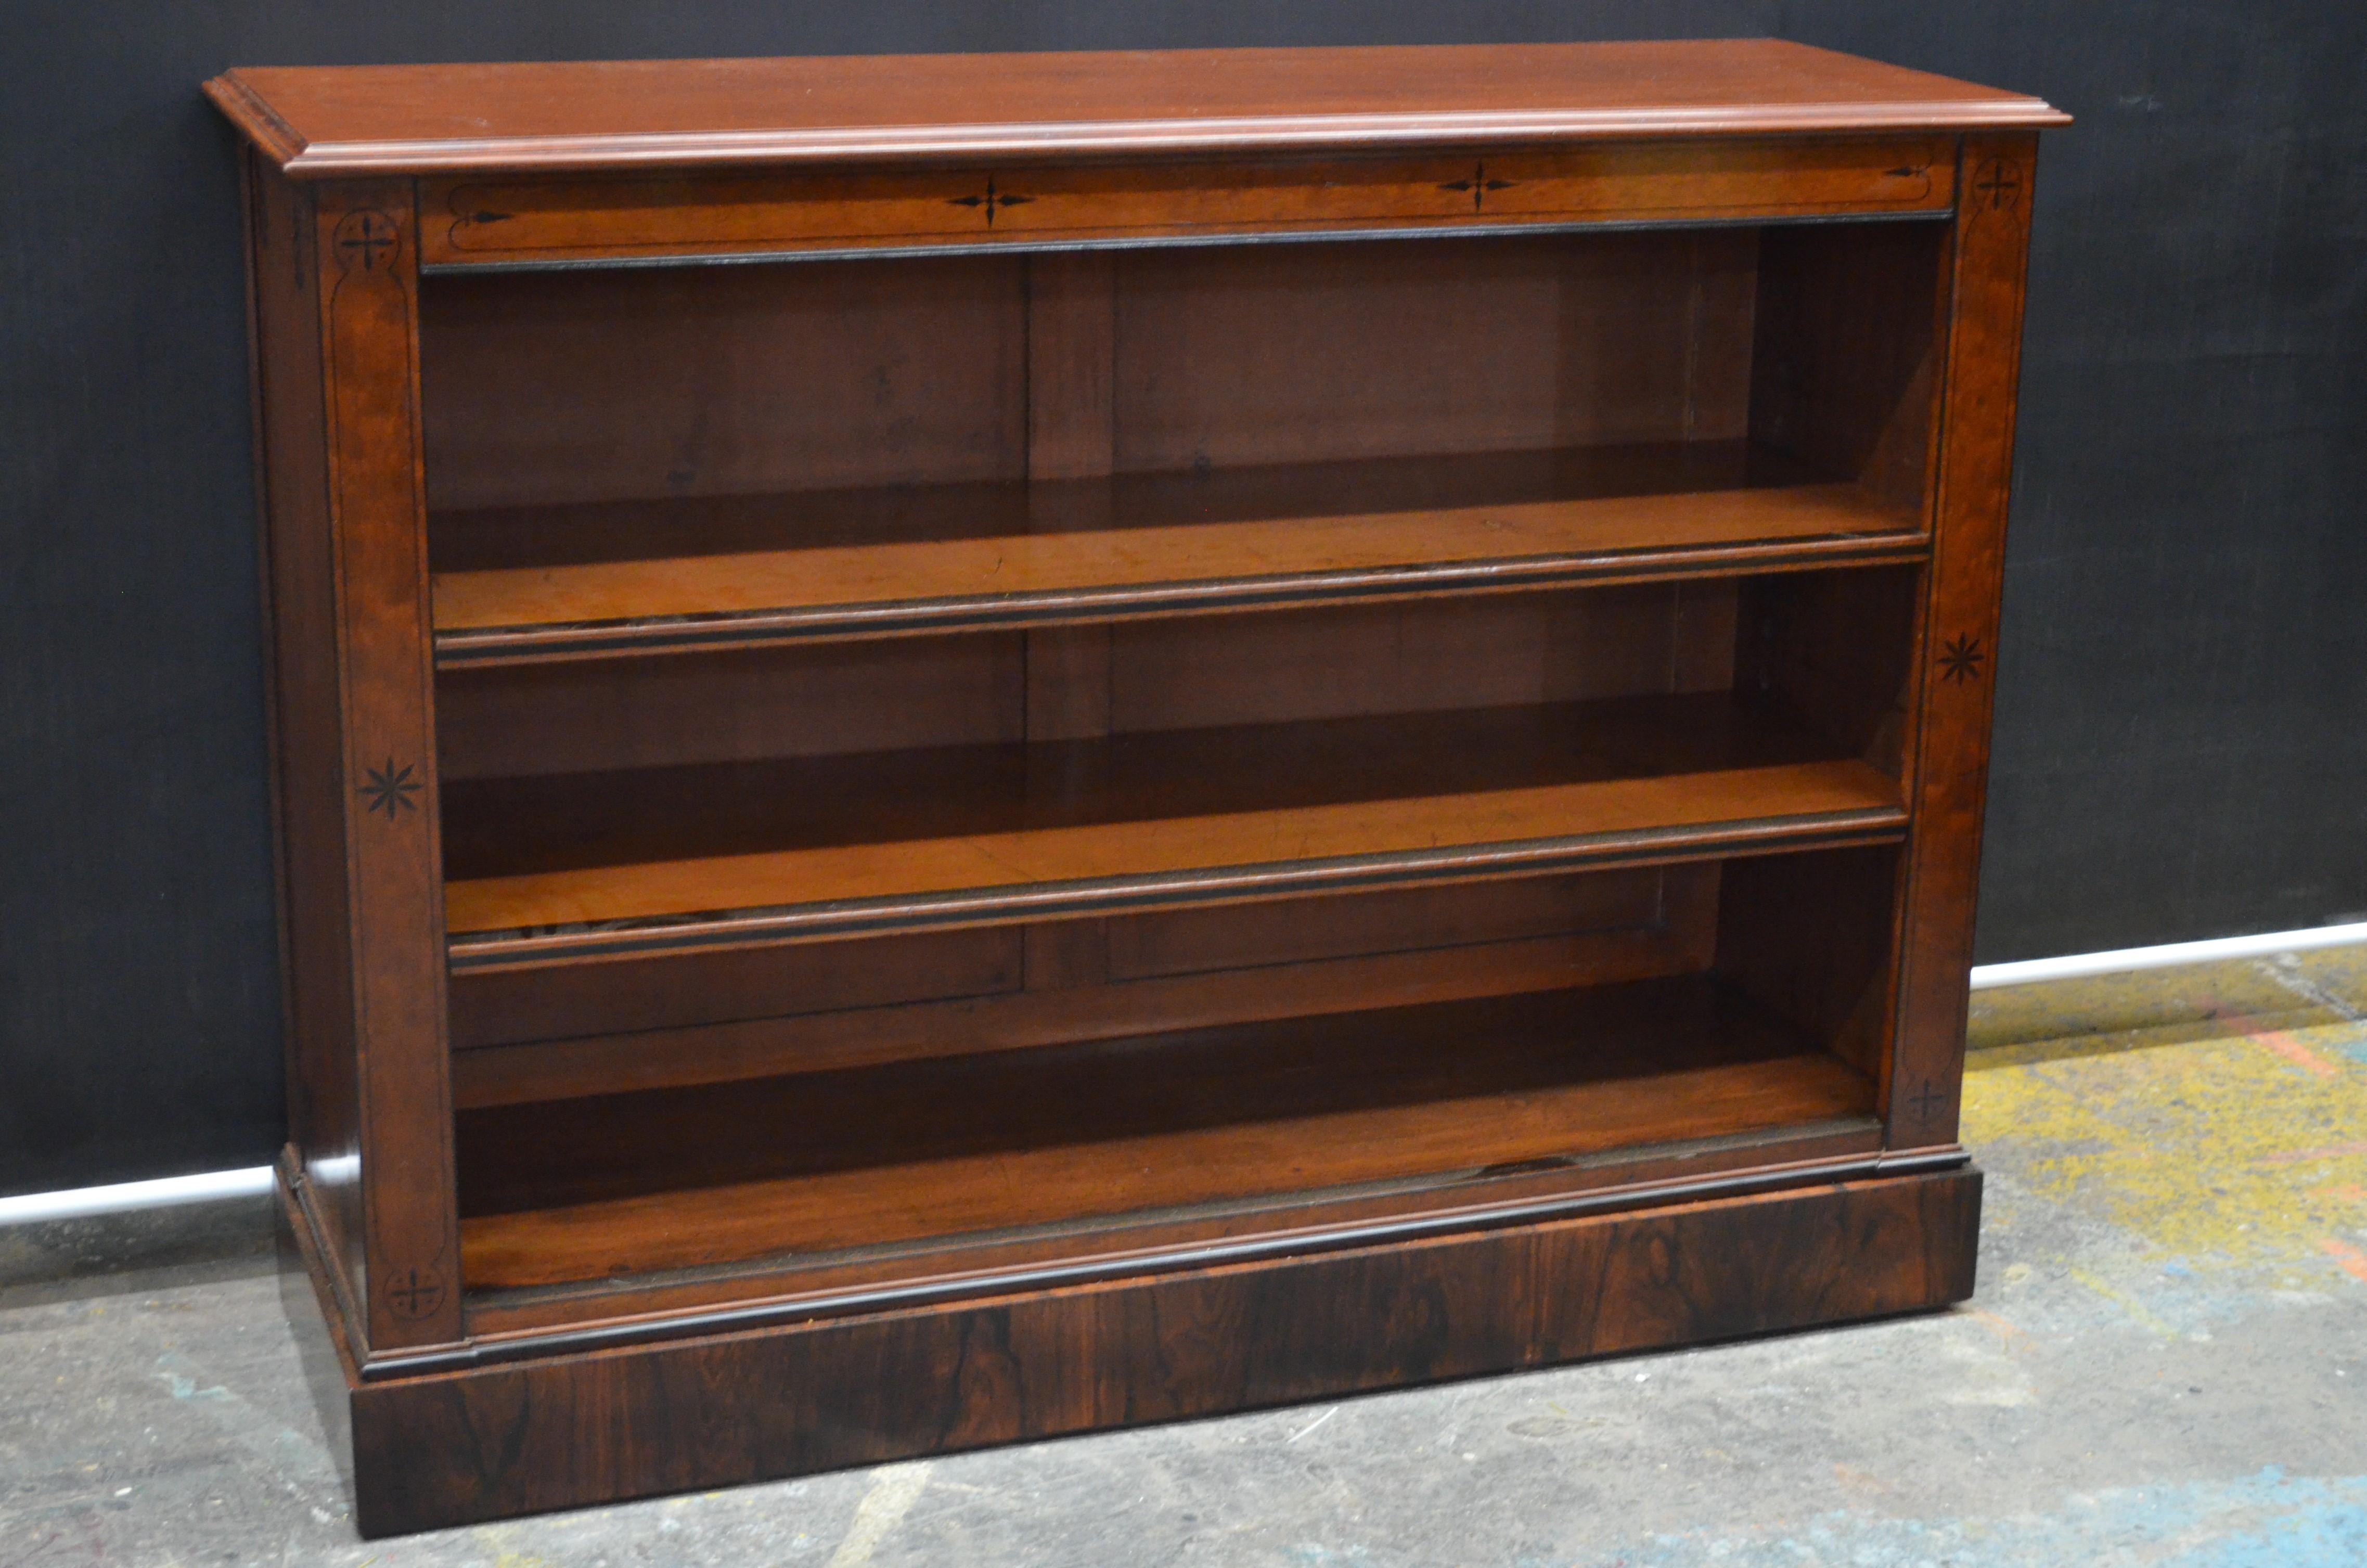 A Regal English Regency Ebony Inlaid mahogany open shelf bookcase made in the early 19th Century. This Regency Egyptian Revival Bookshelf has a Solid Mahogany Top with concave step molded edge. The Mahogany Top is above a Solid Mahogany Frieze with